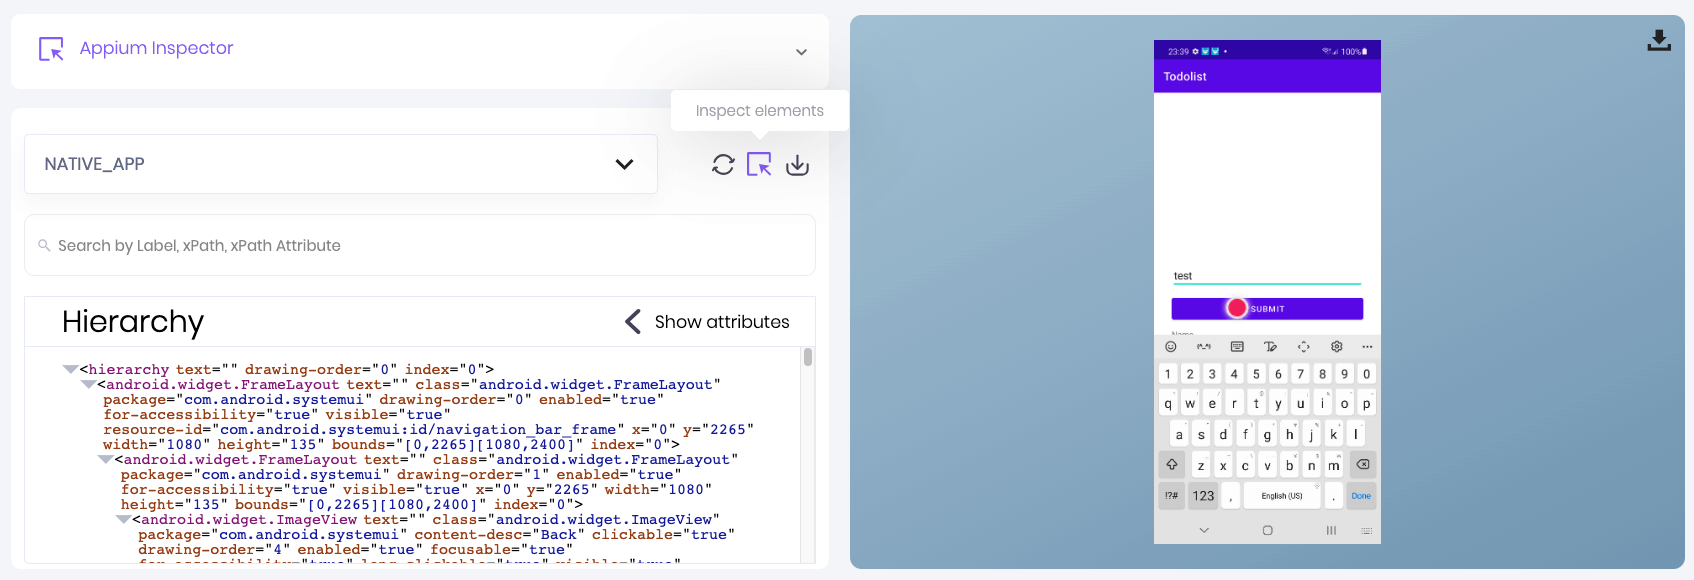 Select Inspect Element and hover over a visual element on device screen